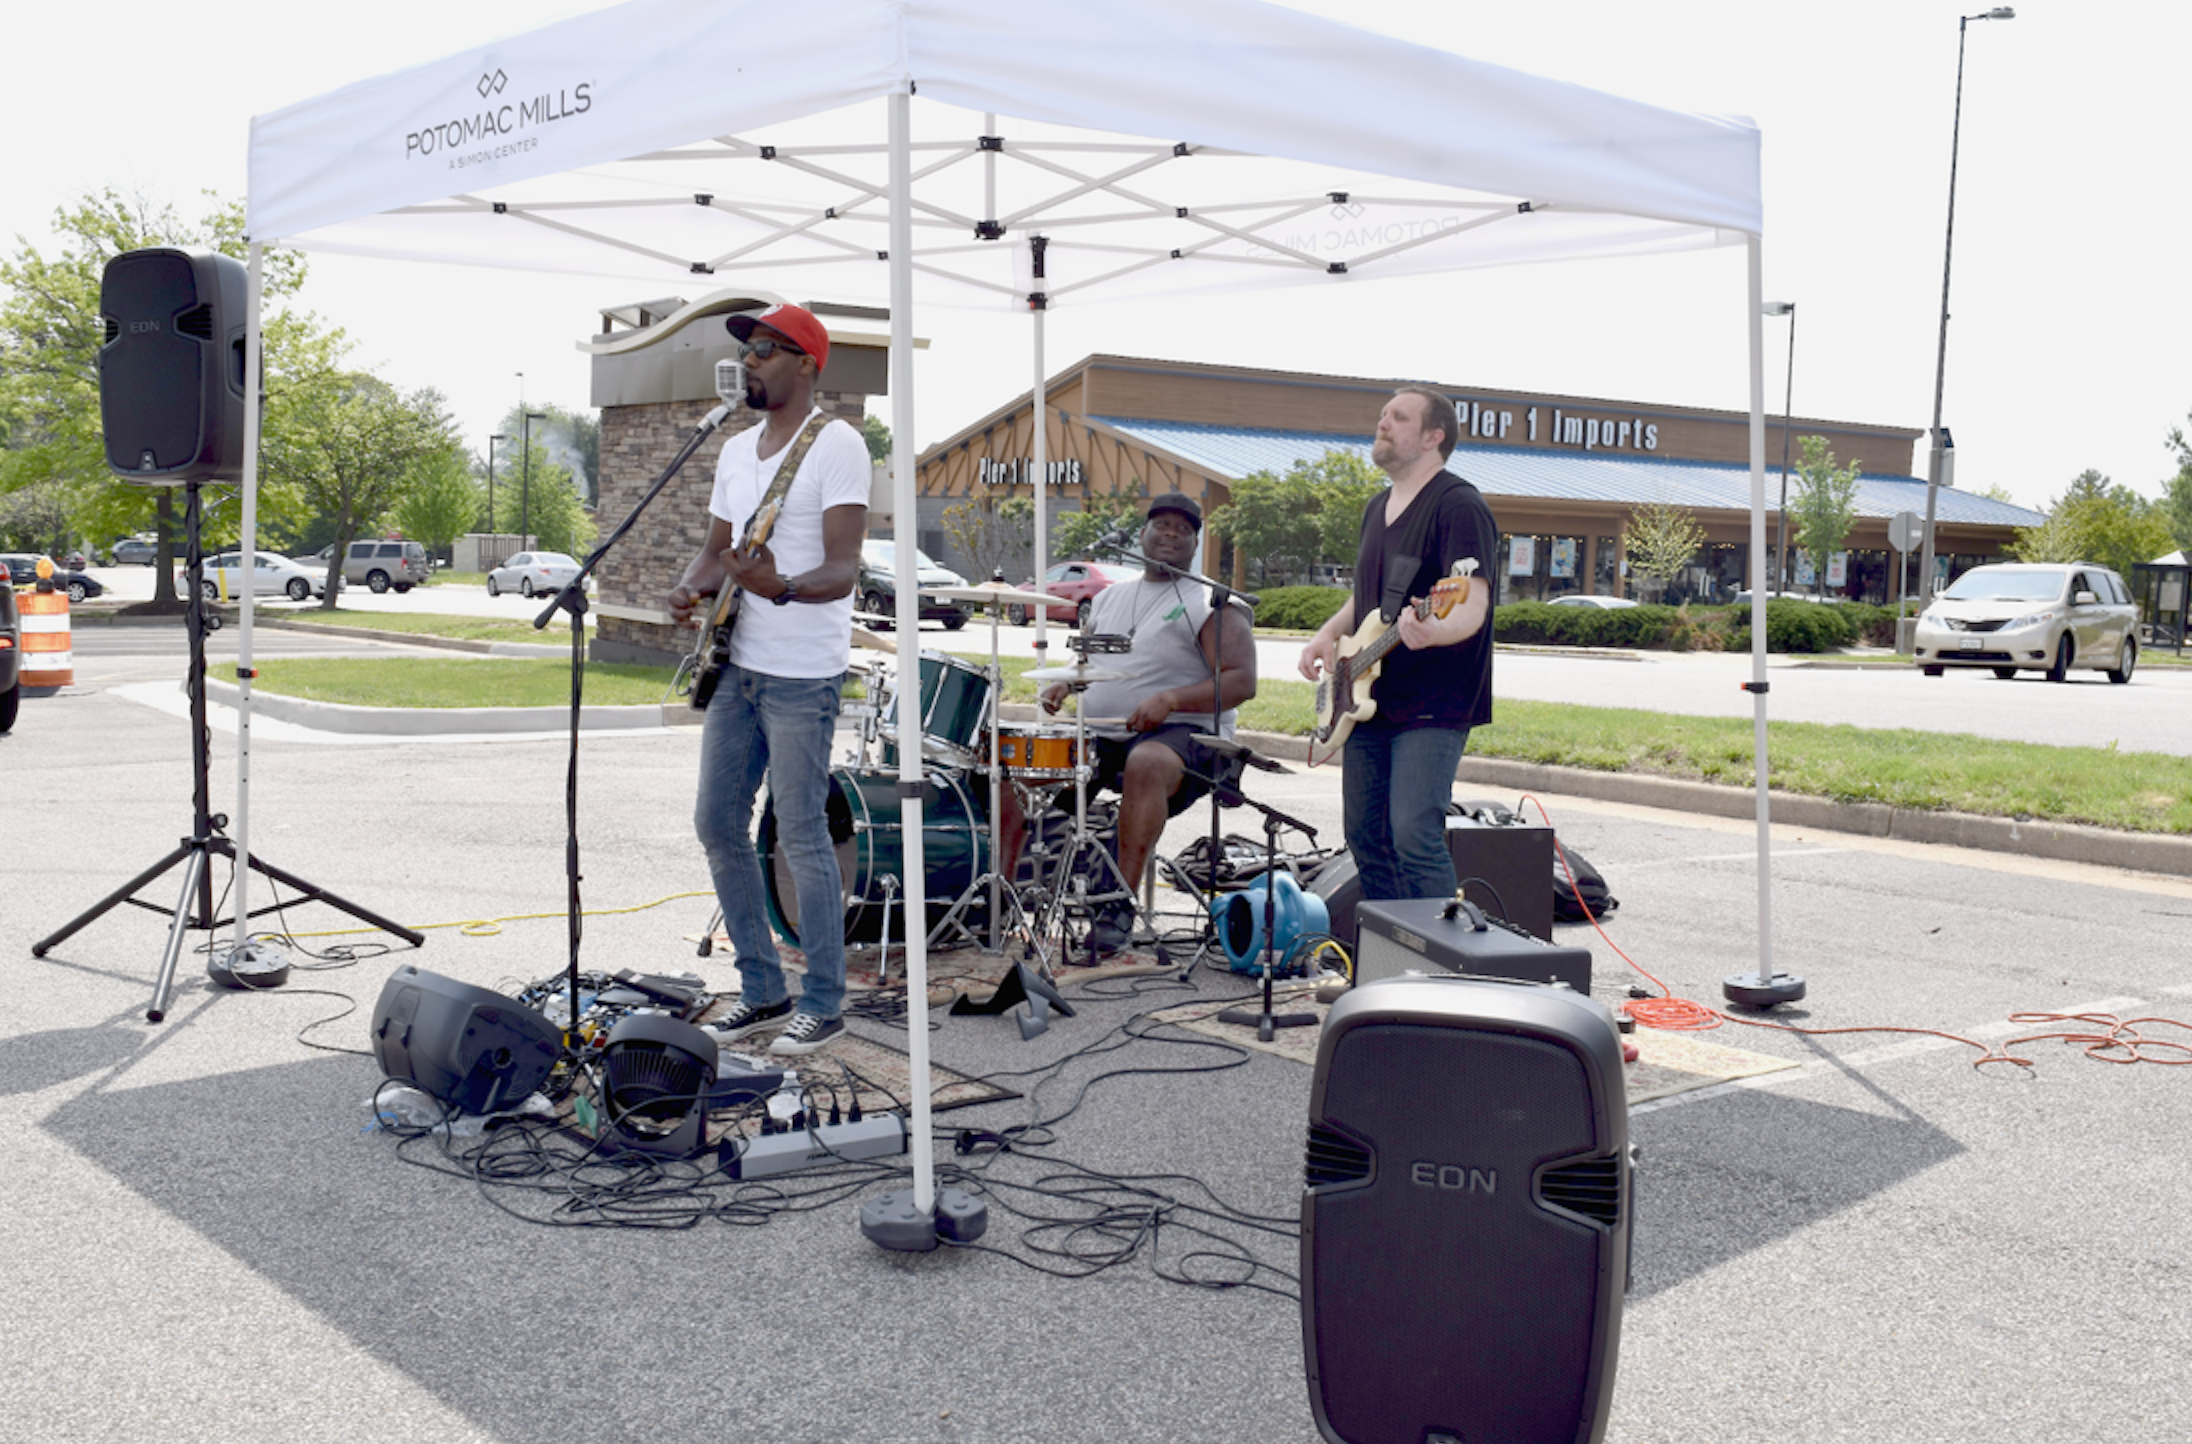 A band played at the opening day of "The Market at Potomac Mills" hosted by Potomac Mils mall in Woodbridge, Virginia last April 29, 2017